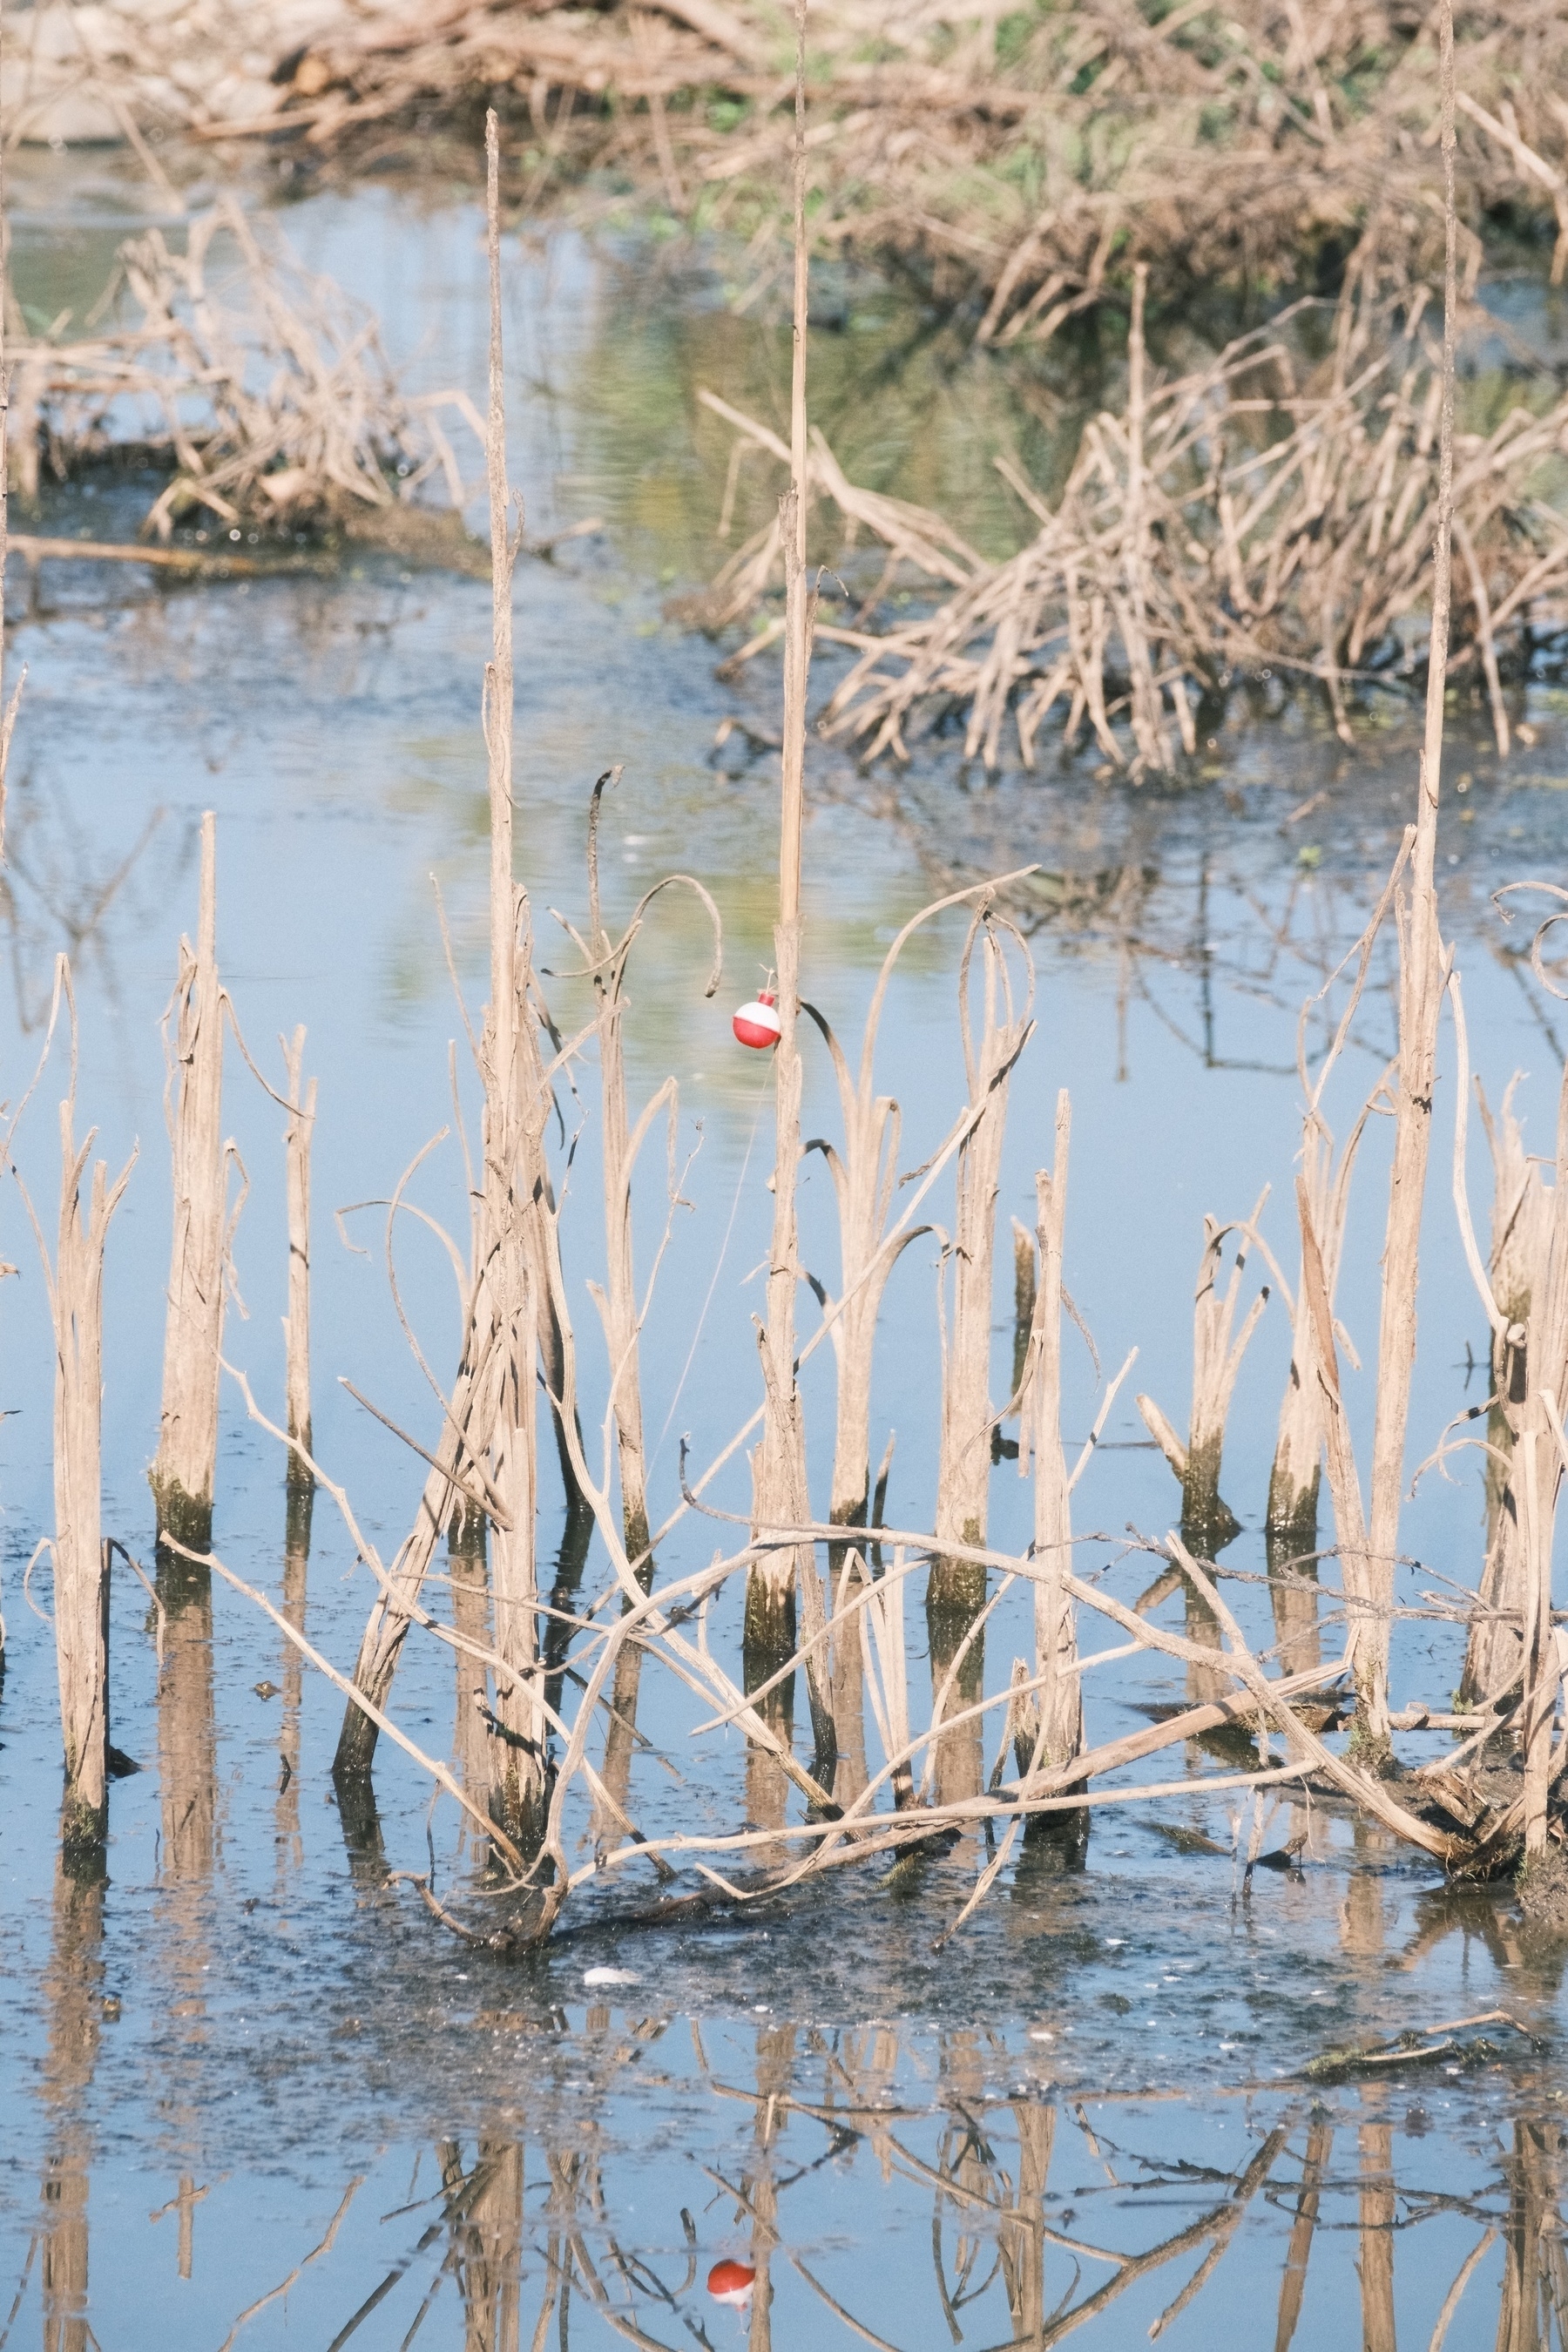 A tranquil wetland scene with dry, reedy plants protruding from the water and a single red and white fishing bobber visible among the stalks. The bobber reflects in the placid water below.